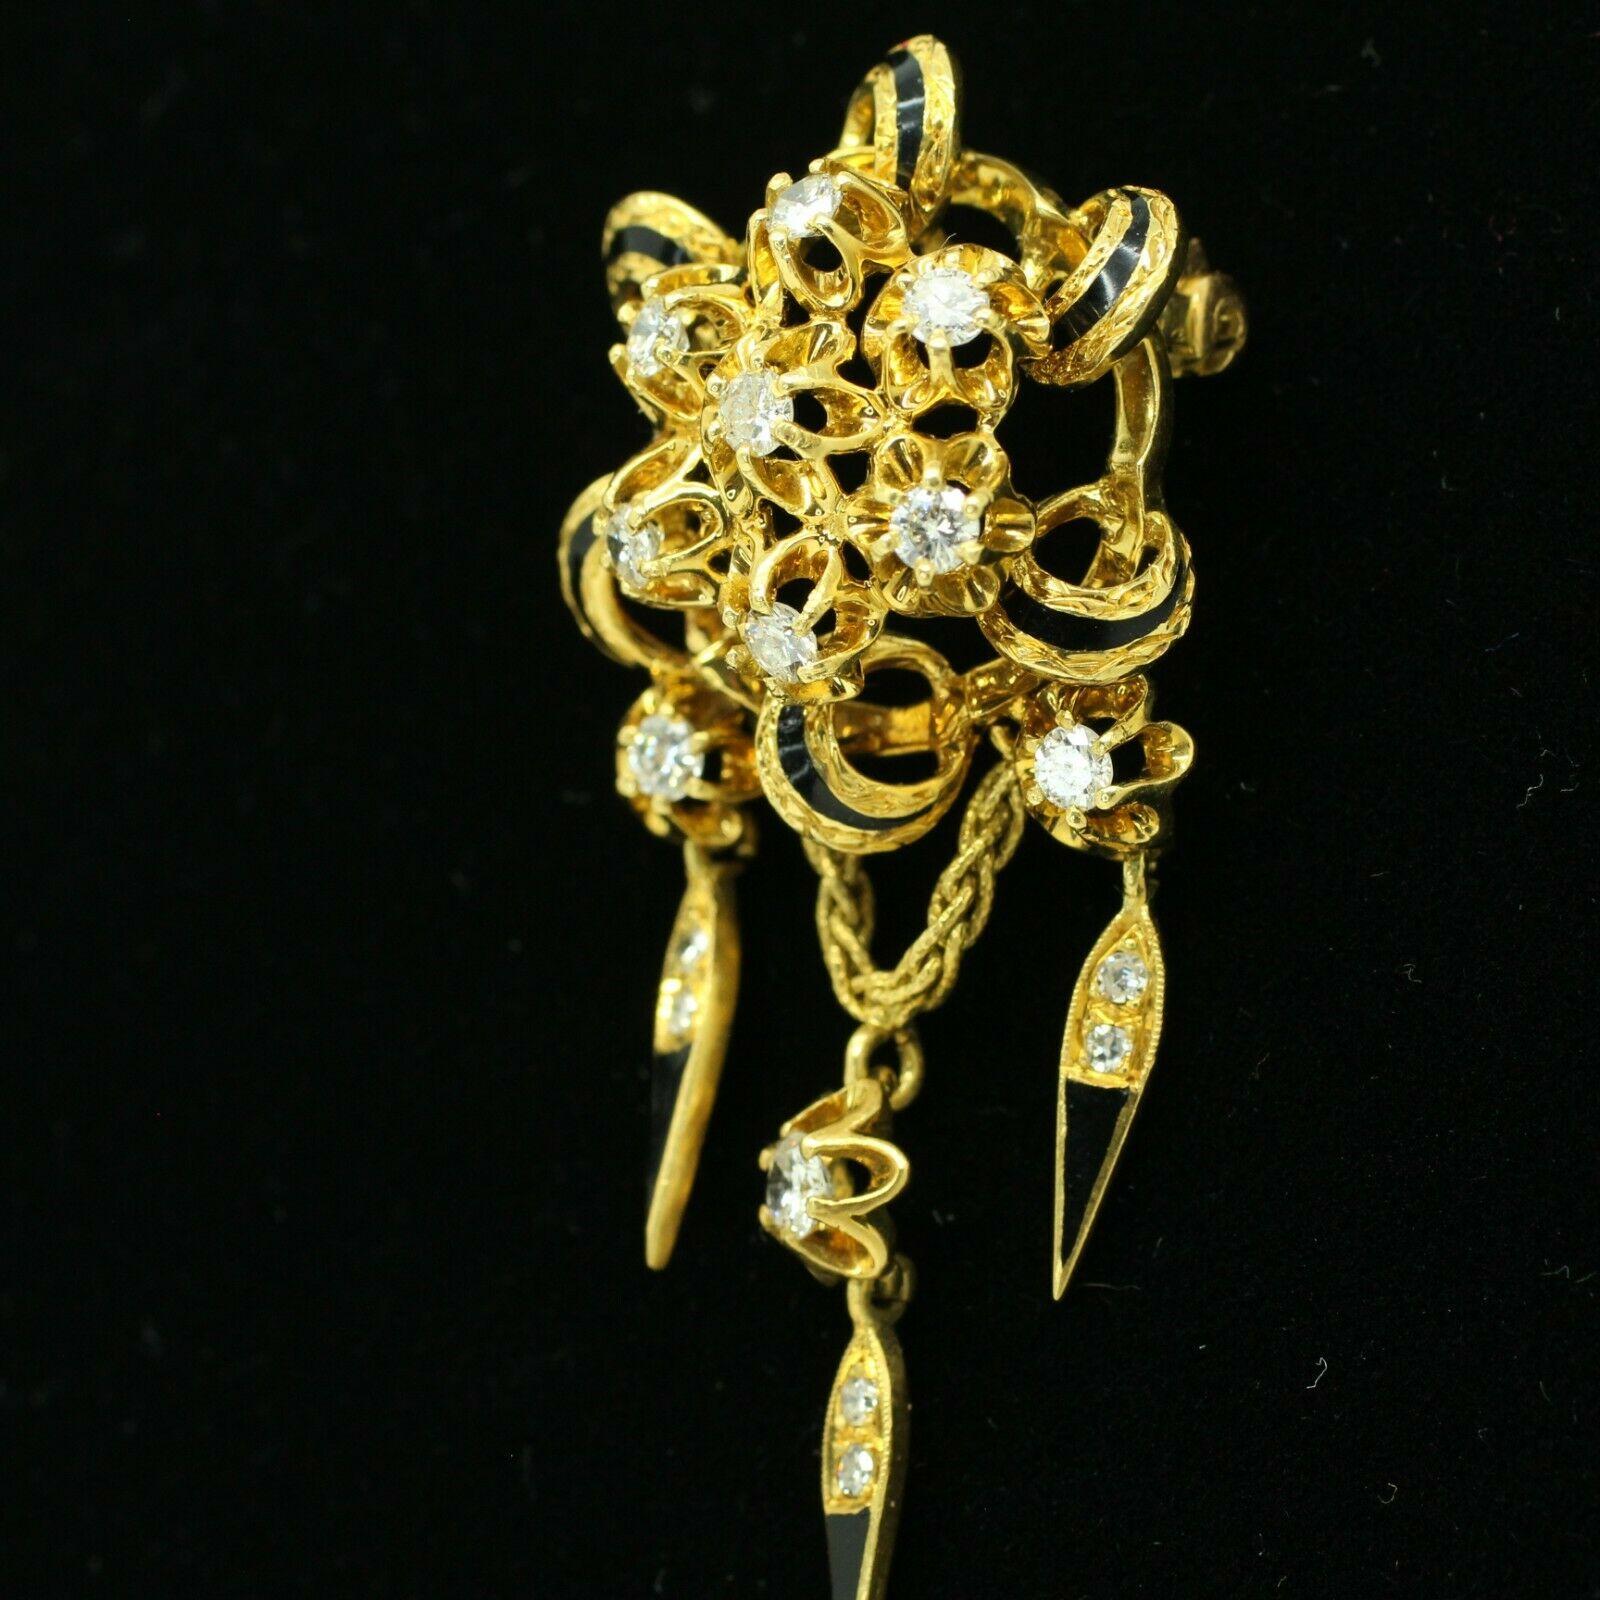 Contemporary 18k Yellow Gold Diamond Brooch with Enamel